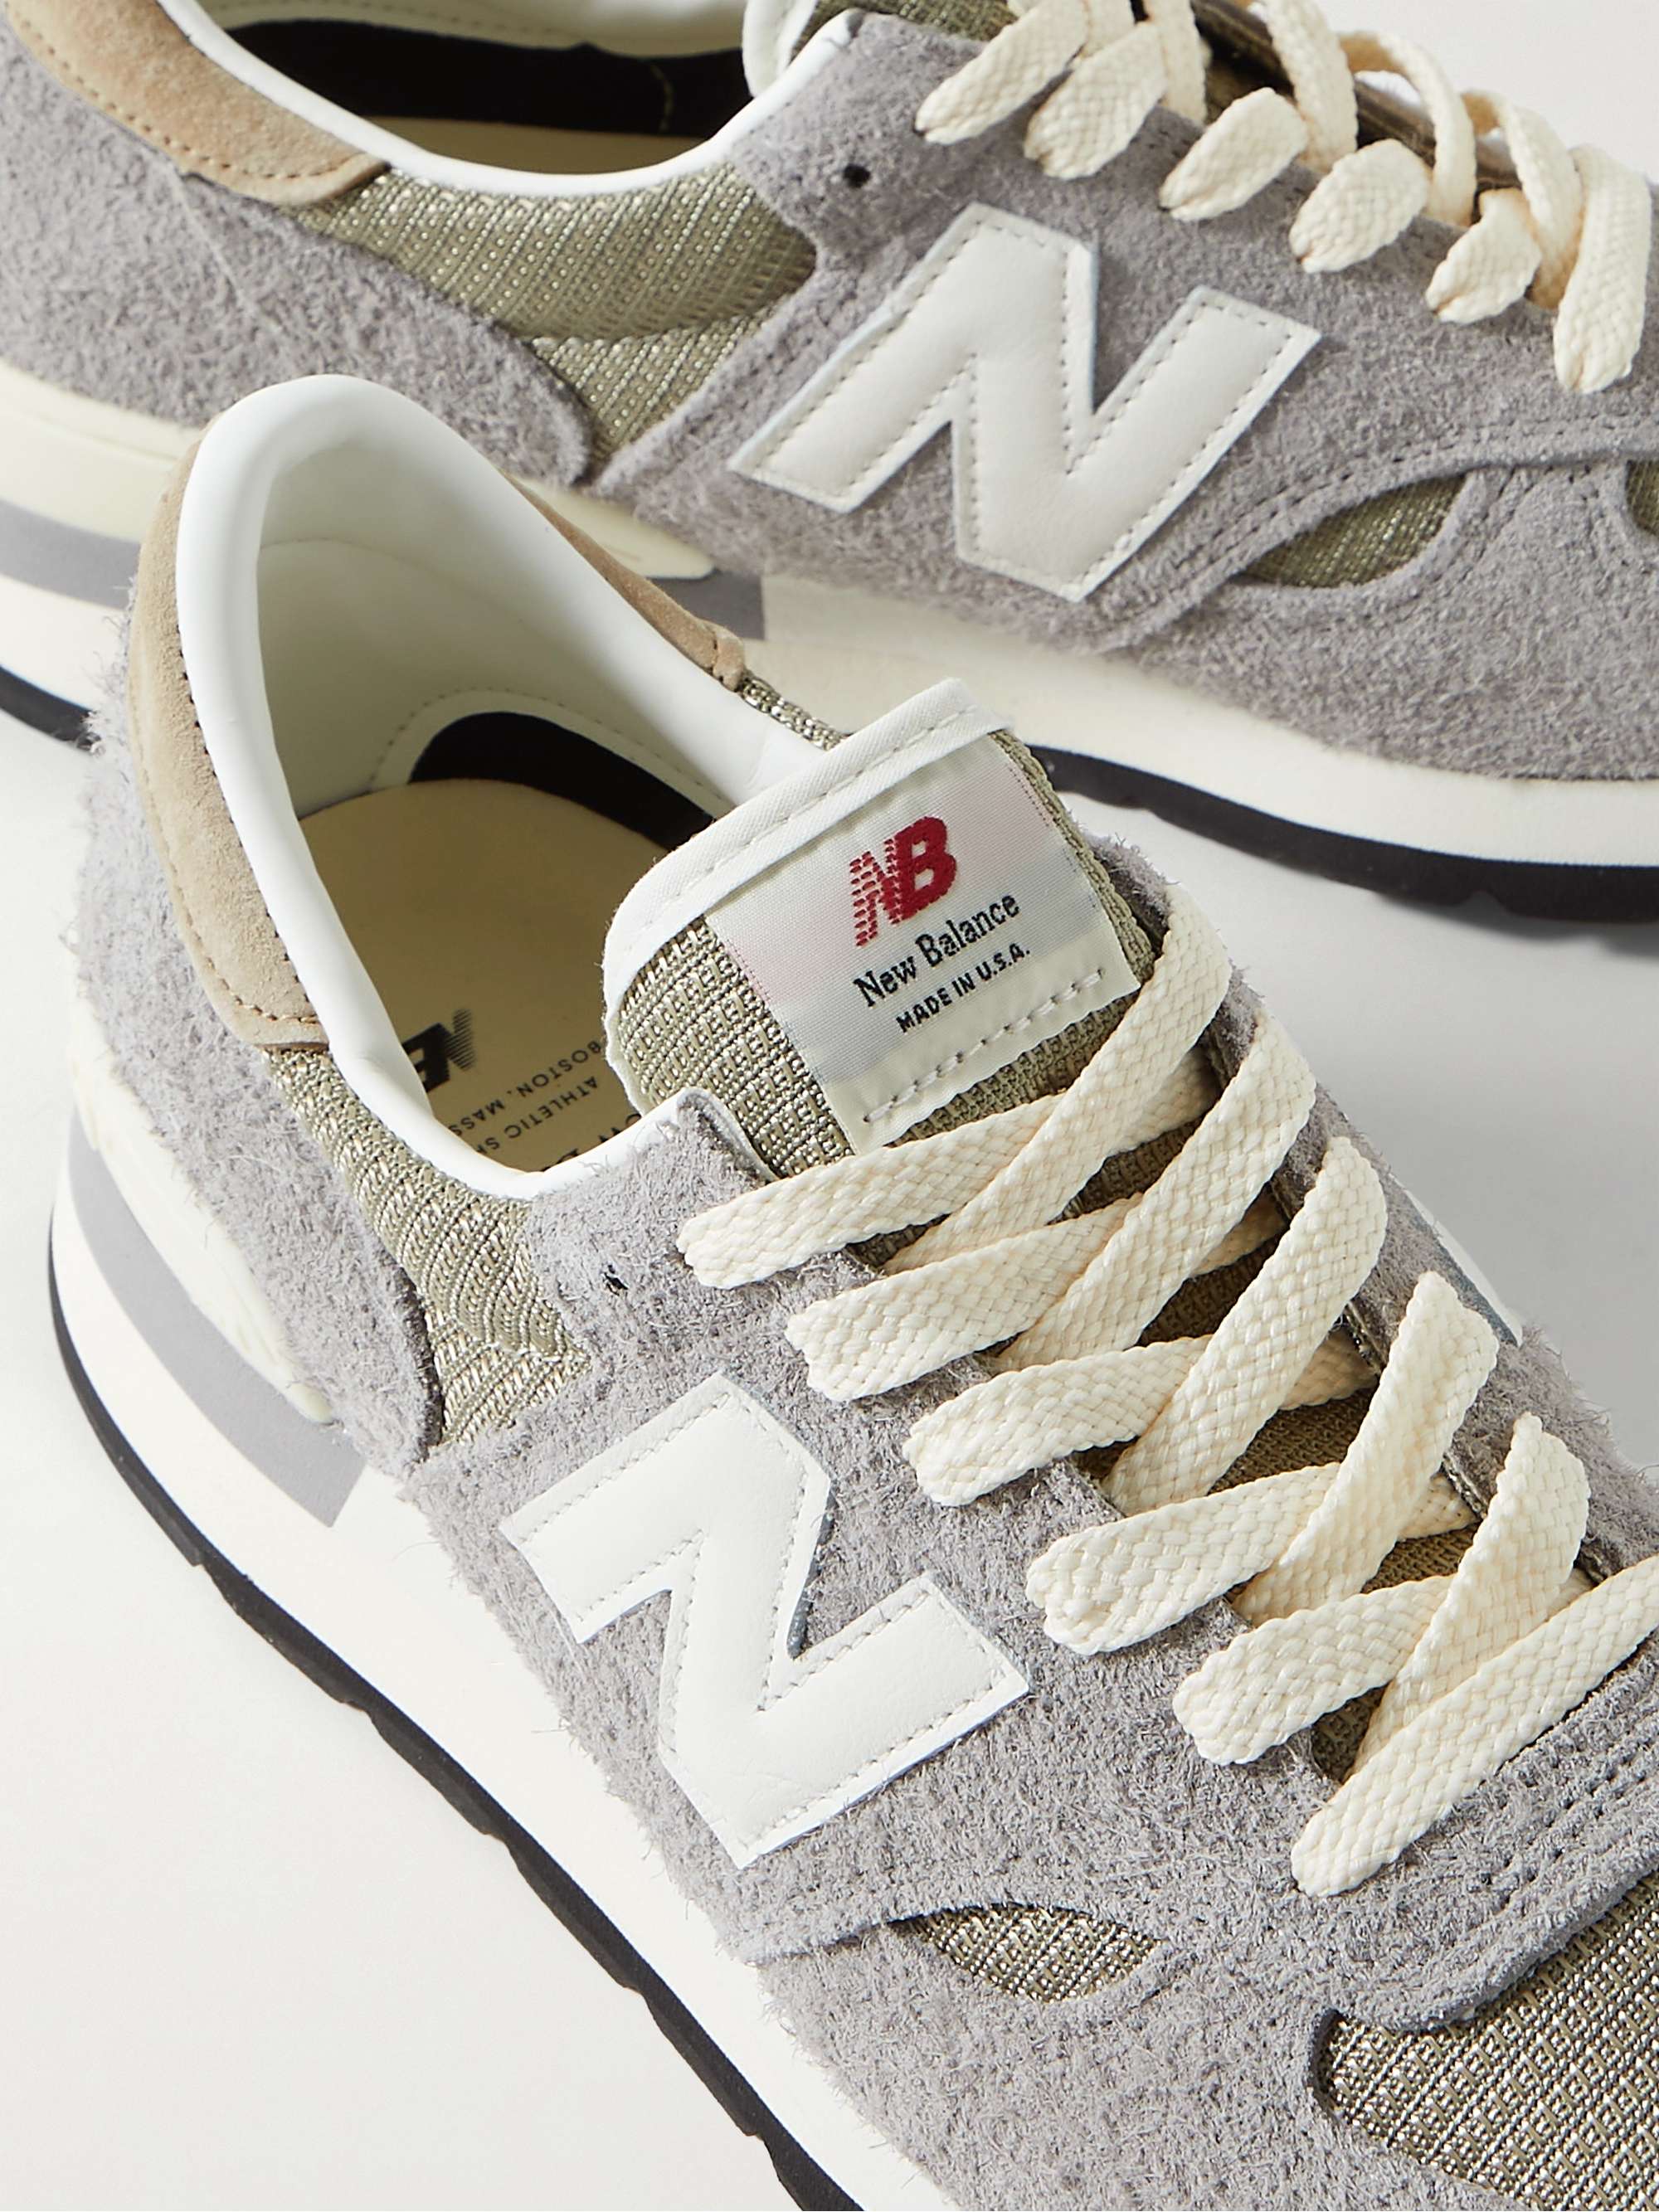 NEW BALANCE M990v1 Suede and Mesh Sneakers